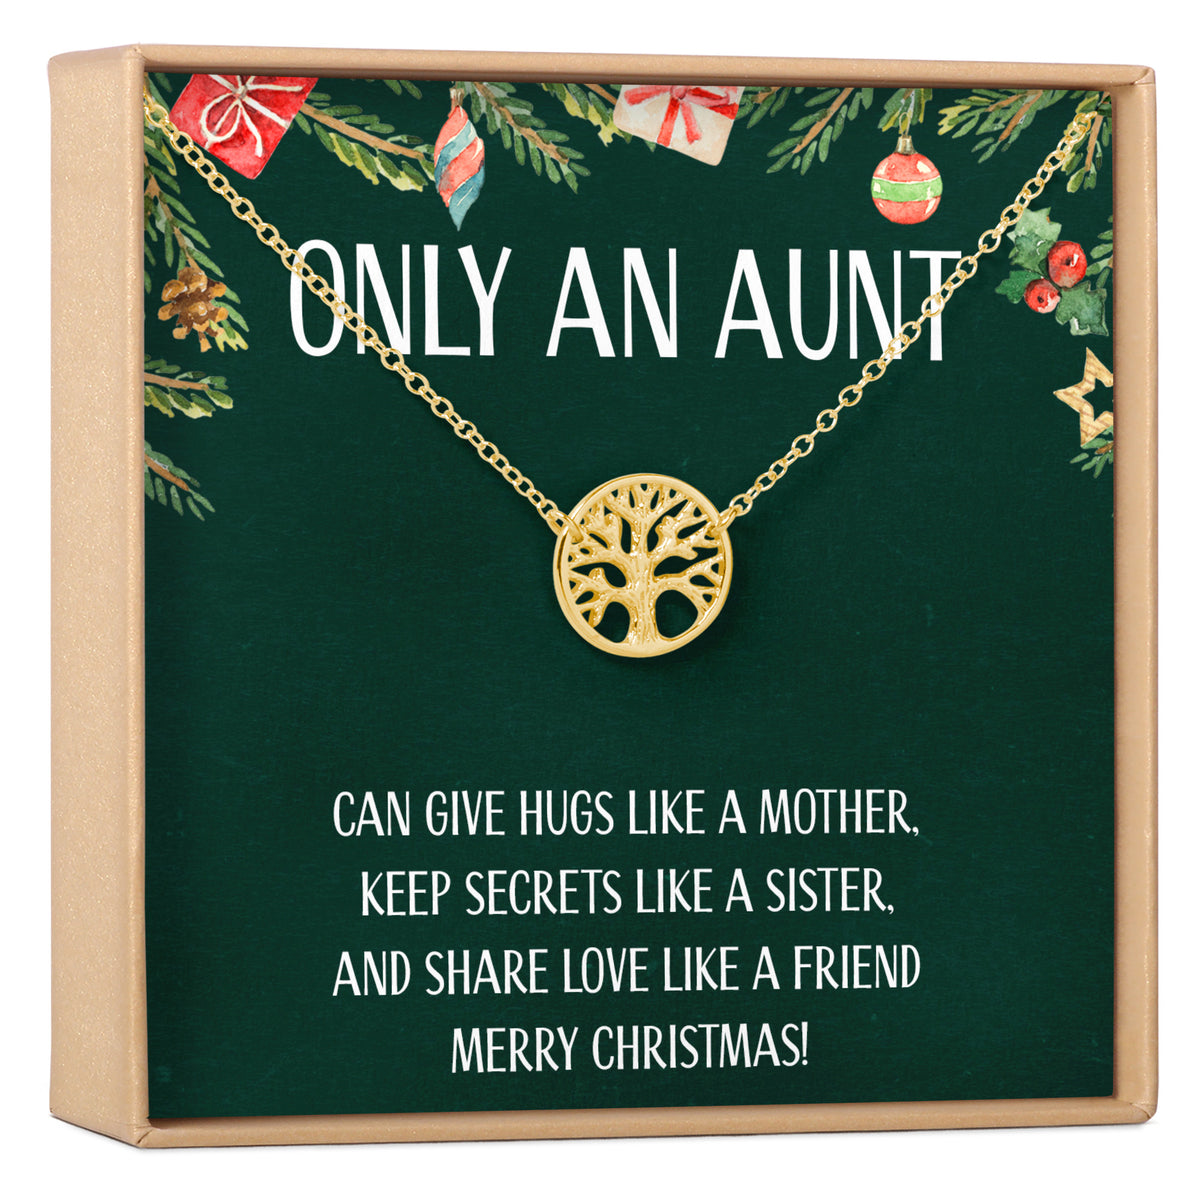 Christmas Gift for Aunt: Present, Necklace Jewelry, Xmas Holiday Gift Idea, Auntie, Aunt Gift, Aunt Jewelry, Best Aunt, Multiple Necklace Styles, Tree